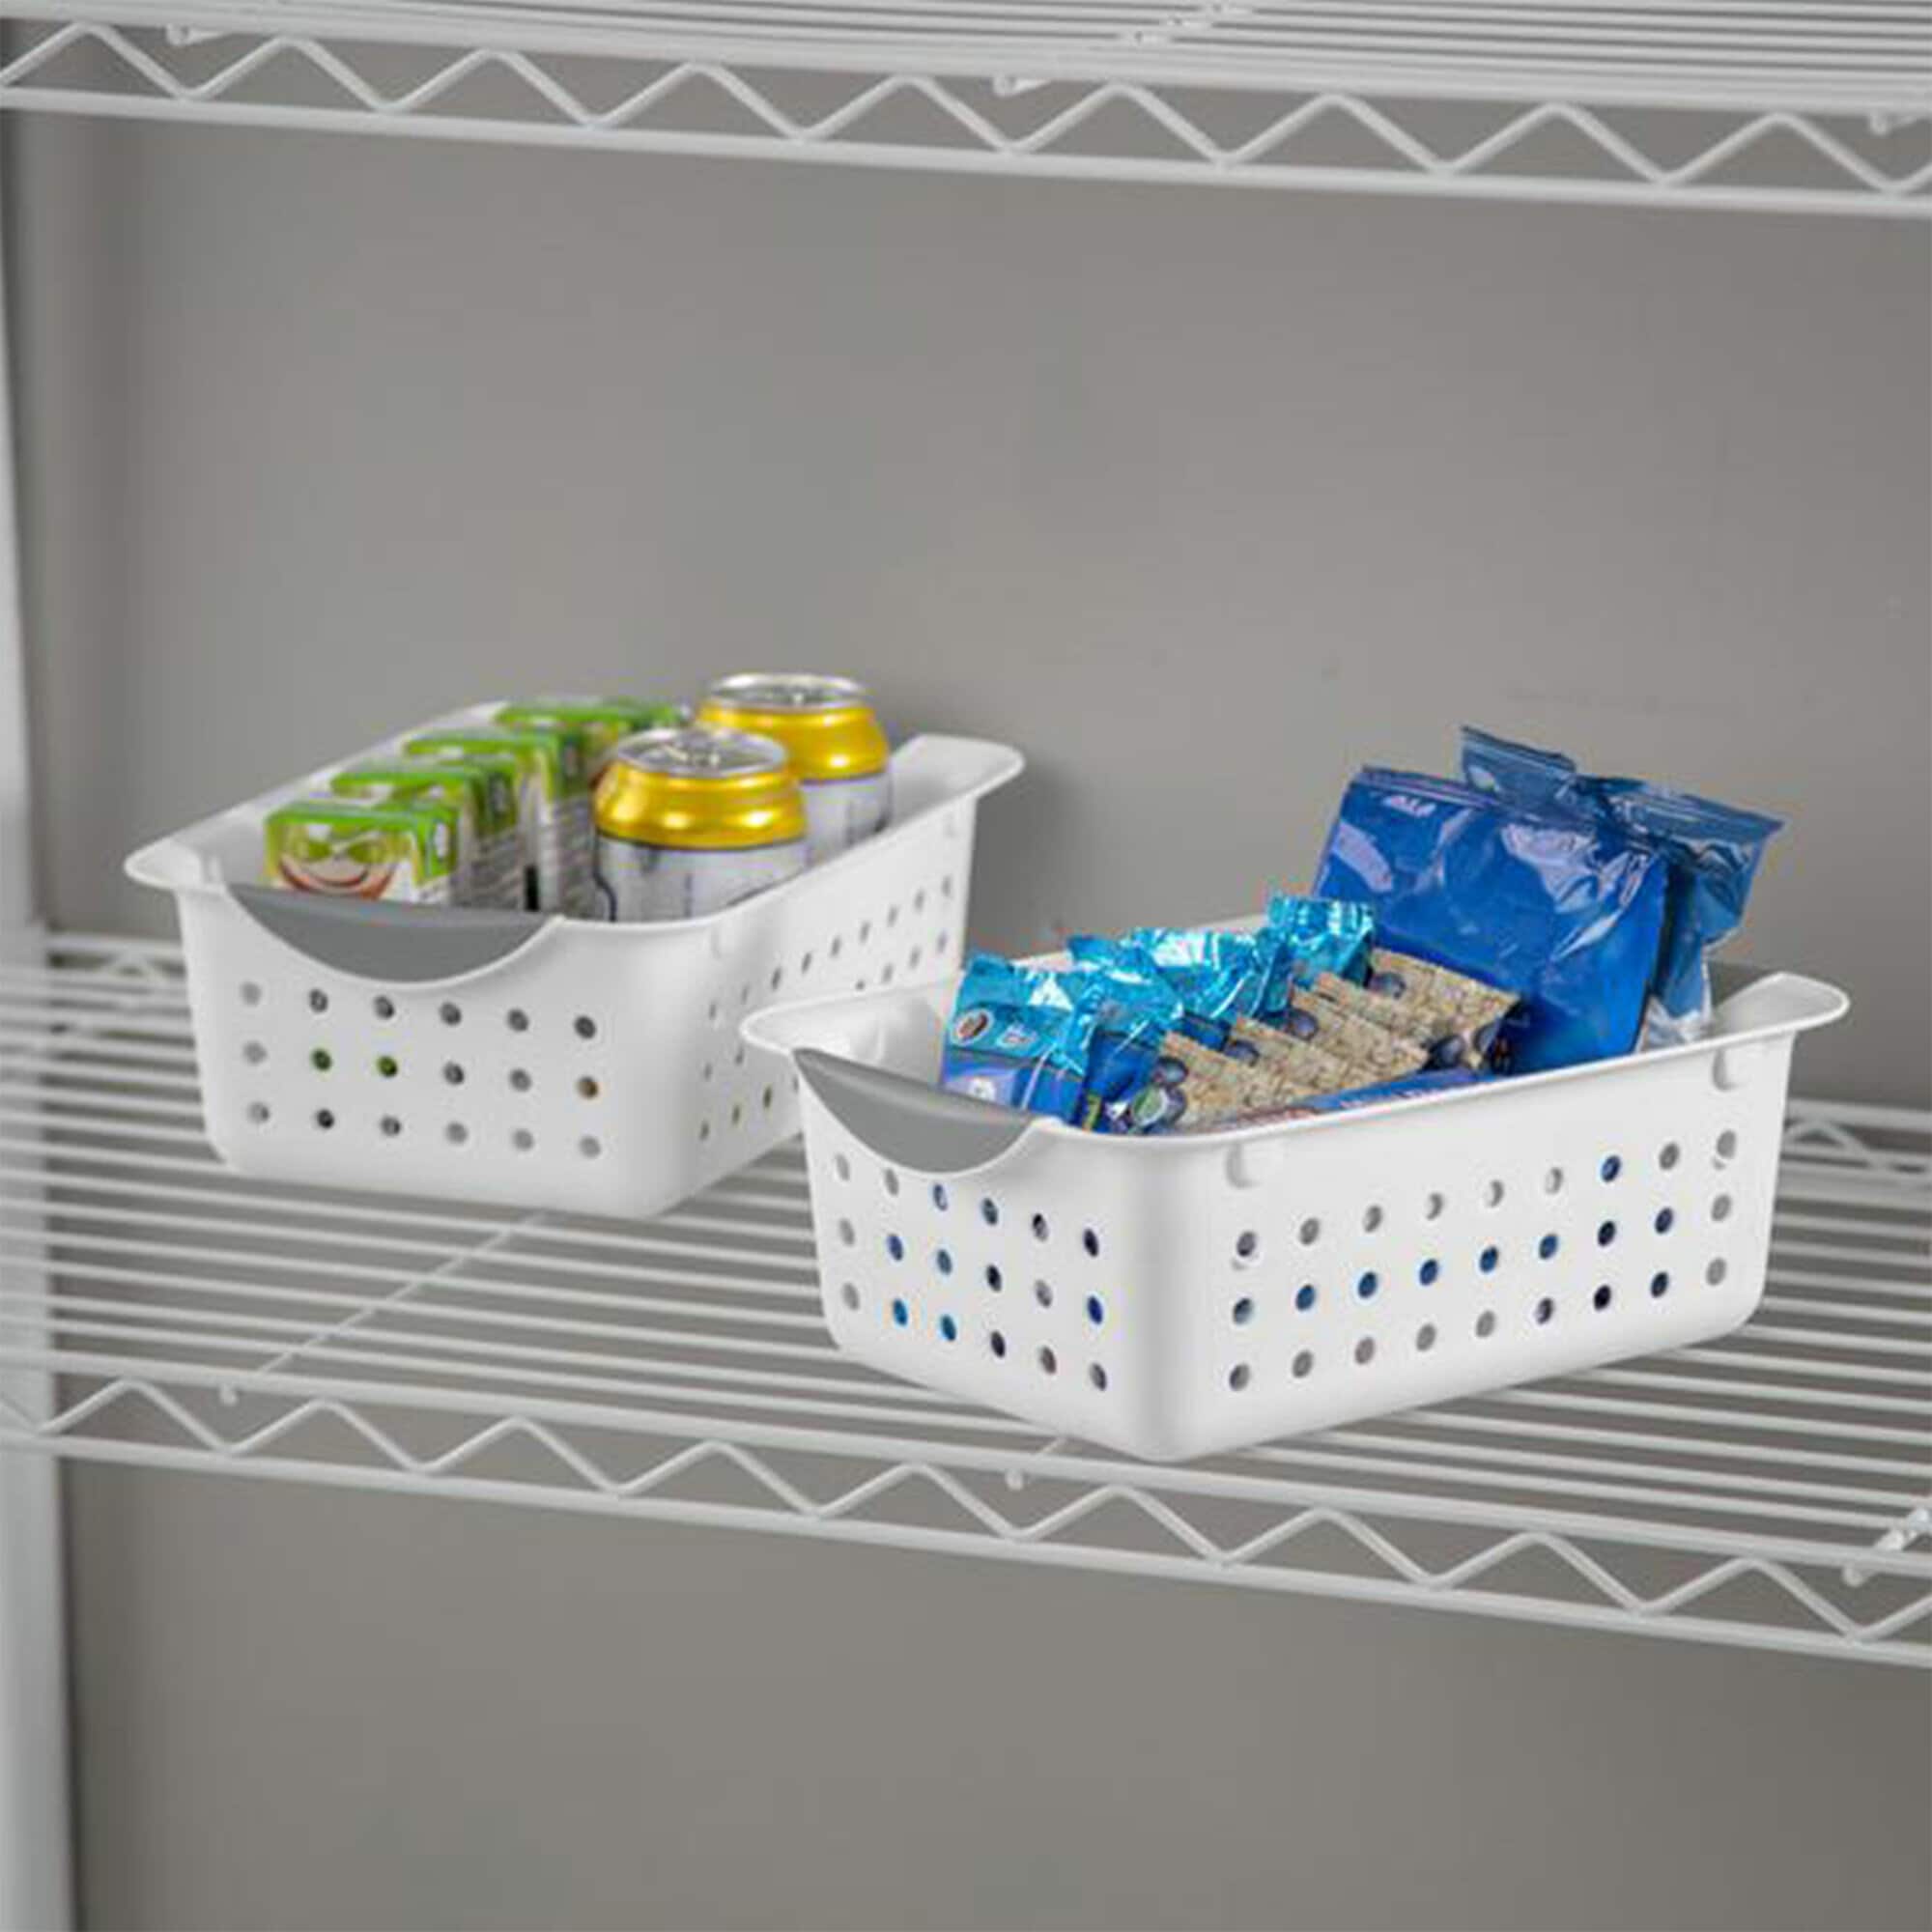 Small Plastic Baskets - Bright (12/package) 62¢ each